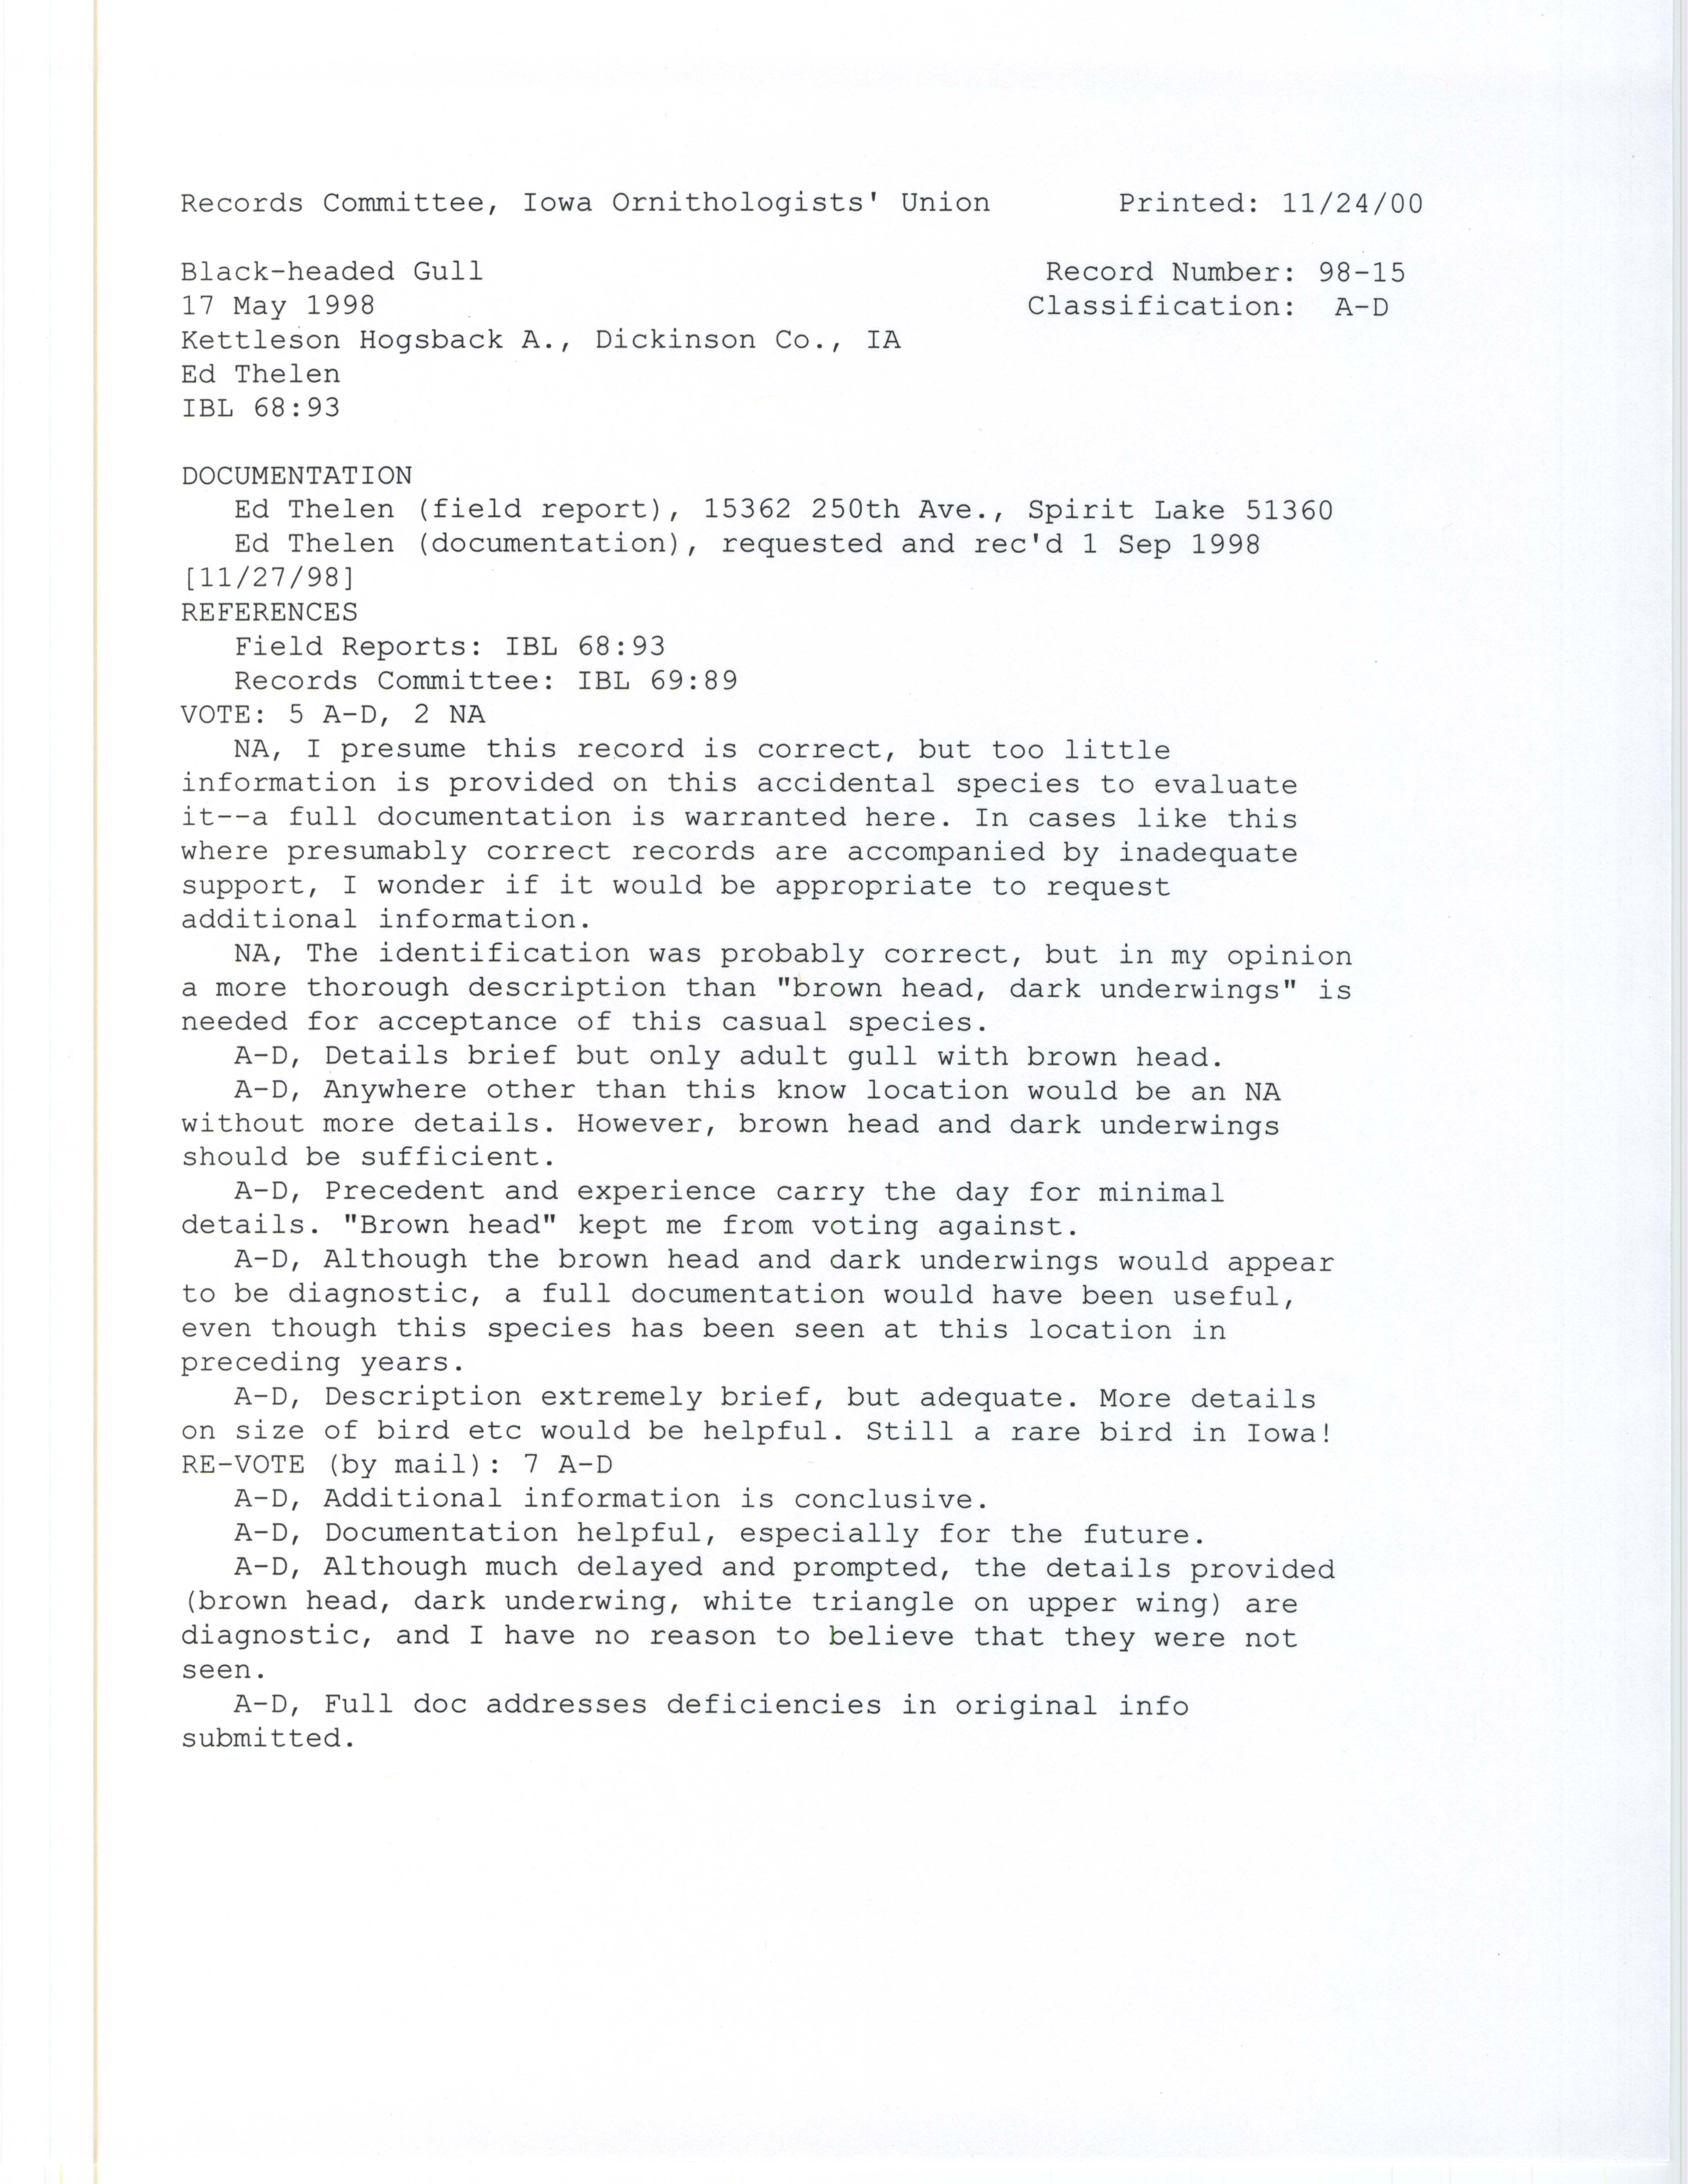 Records Committee review for rare bird sighting of Black-headed Gull at Kettleson Hogsback Area, 1998